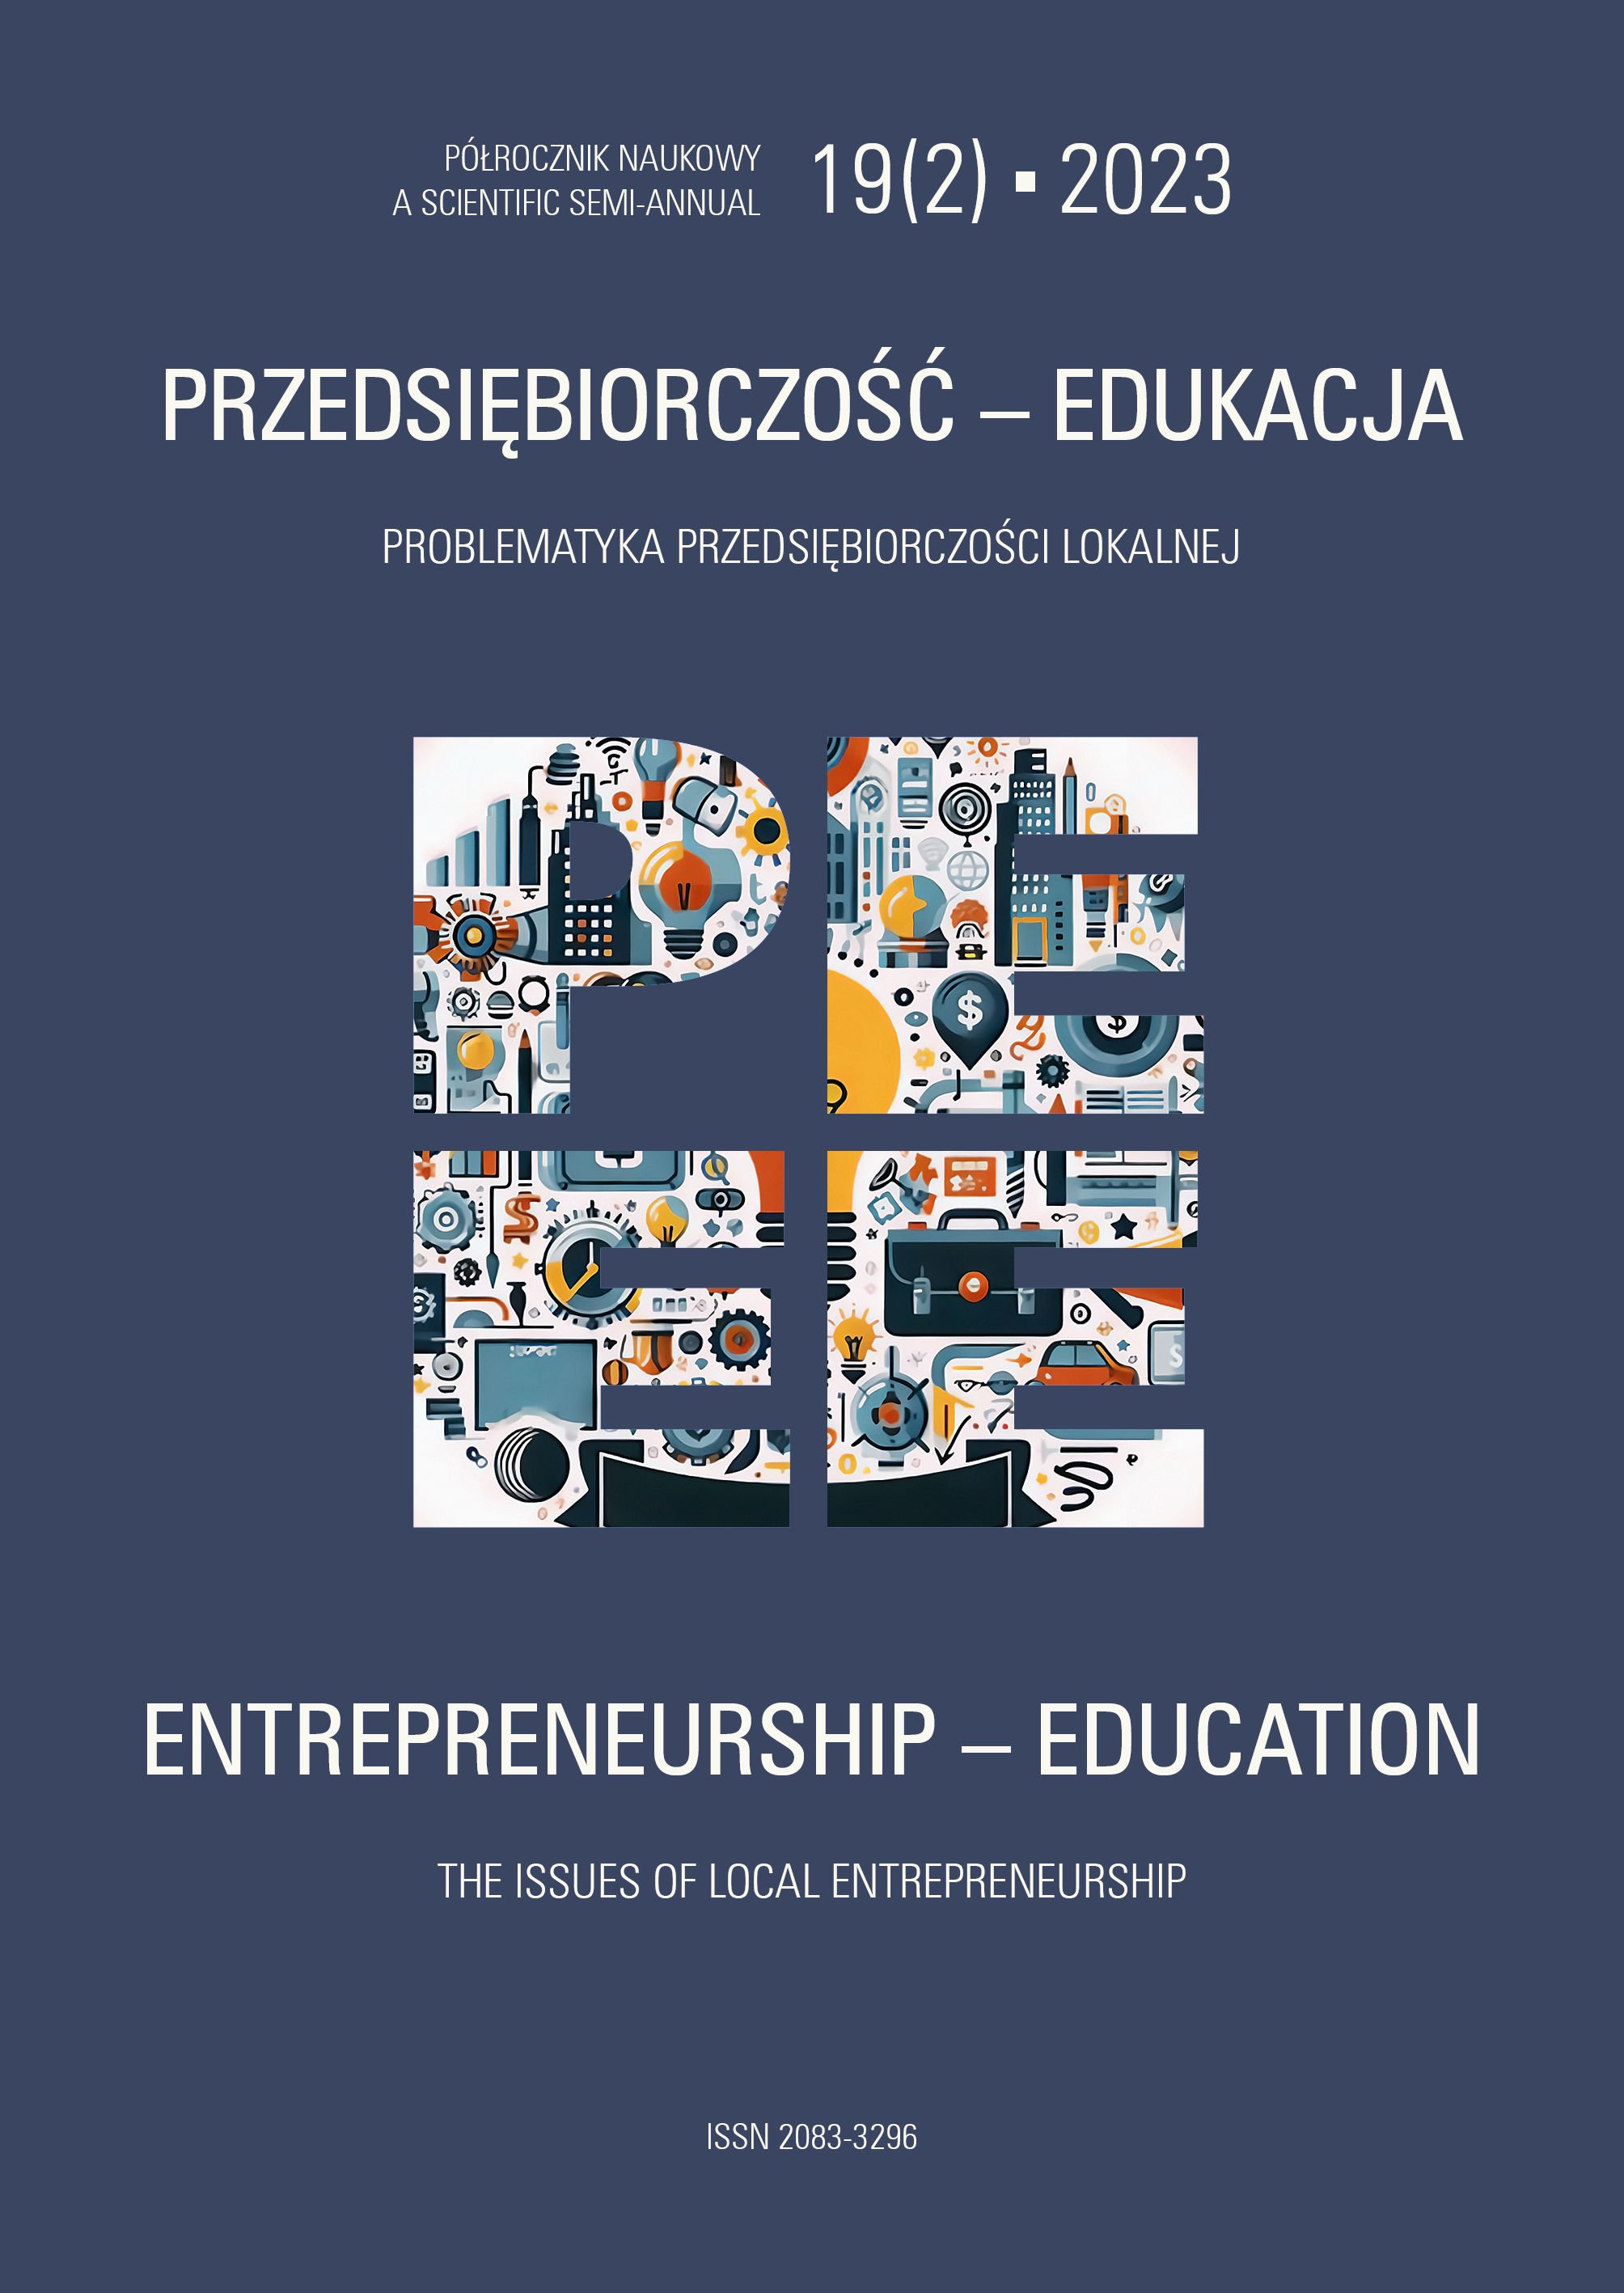 					View Vol. 19 No. 2 (2023): The issues of local entrepreneurship
				